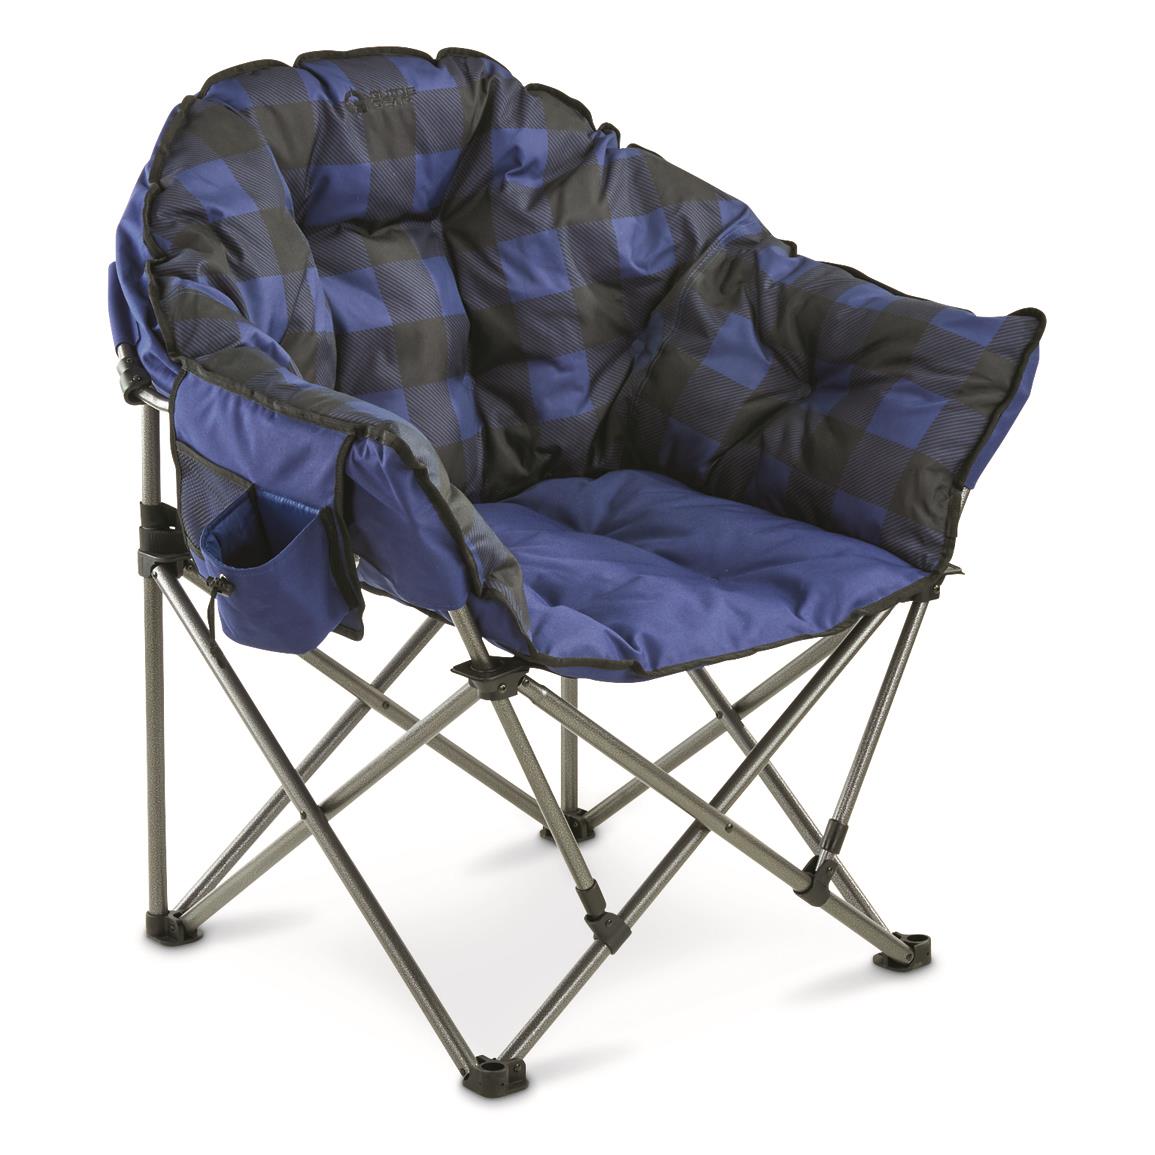 Guide Gear Oversized Club Camp Chair 500 Lb Capacity 703611 Camping Chairs At Sportsman S Guide